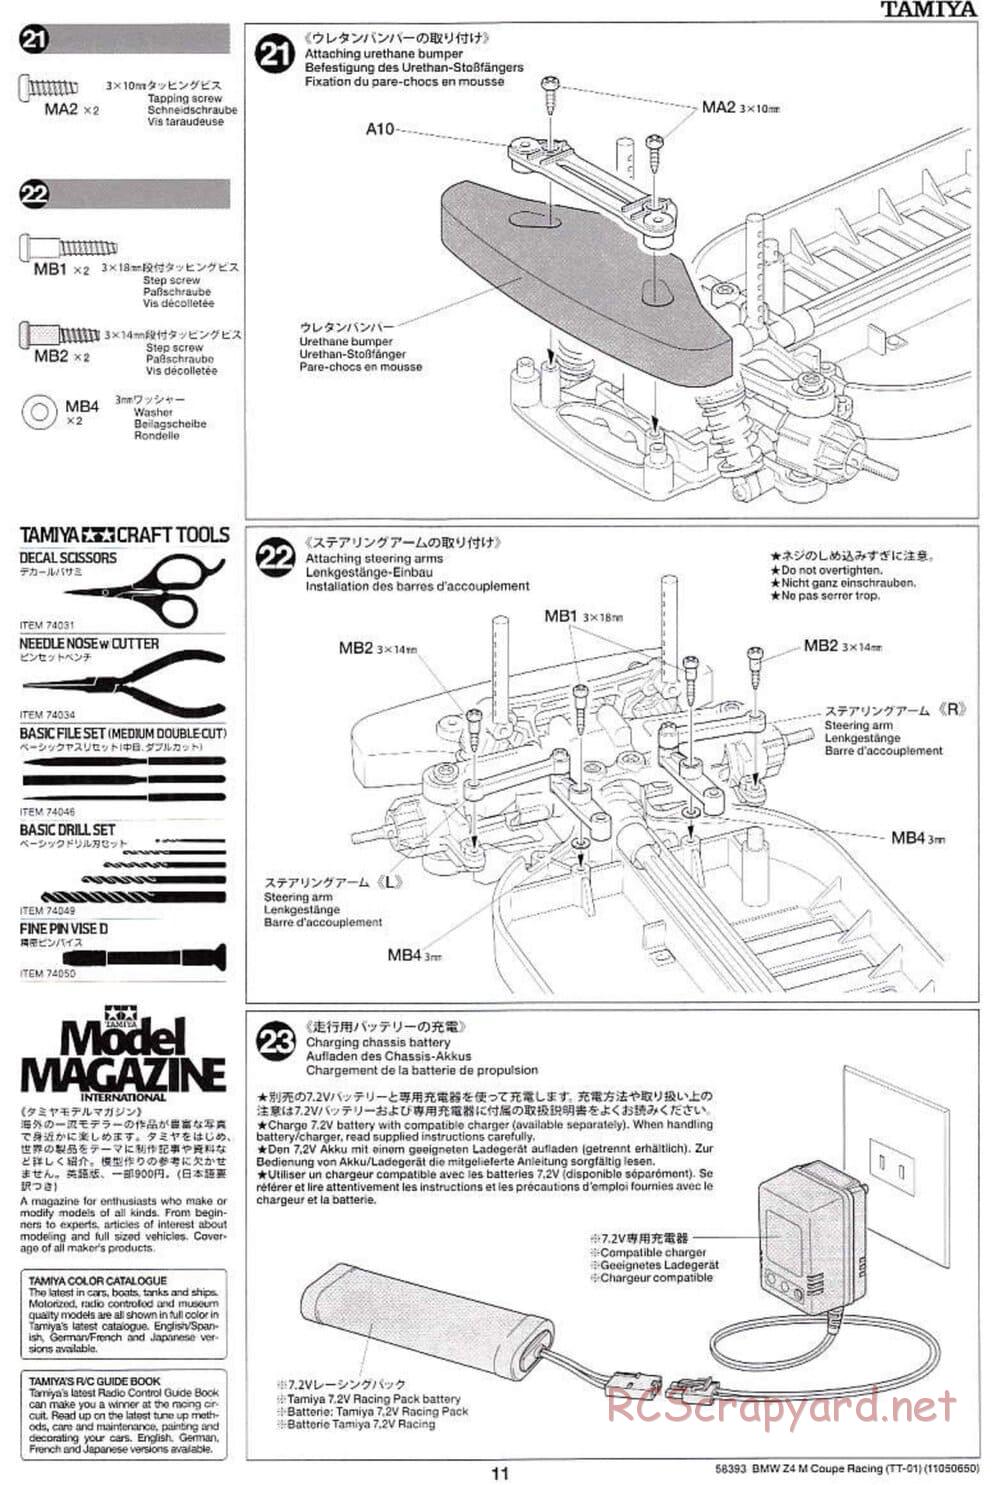 Tamiya - BMW Z4 M Coupe Racing - TT-01 Chassis - Manual - Page 11